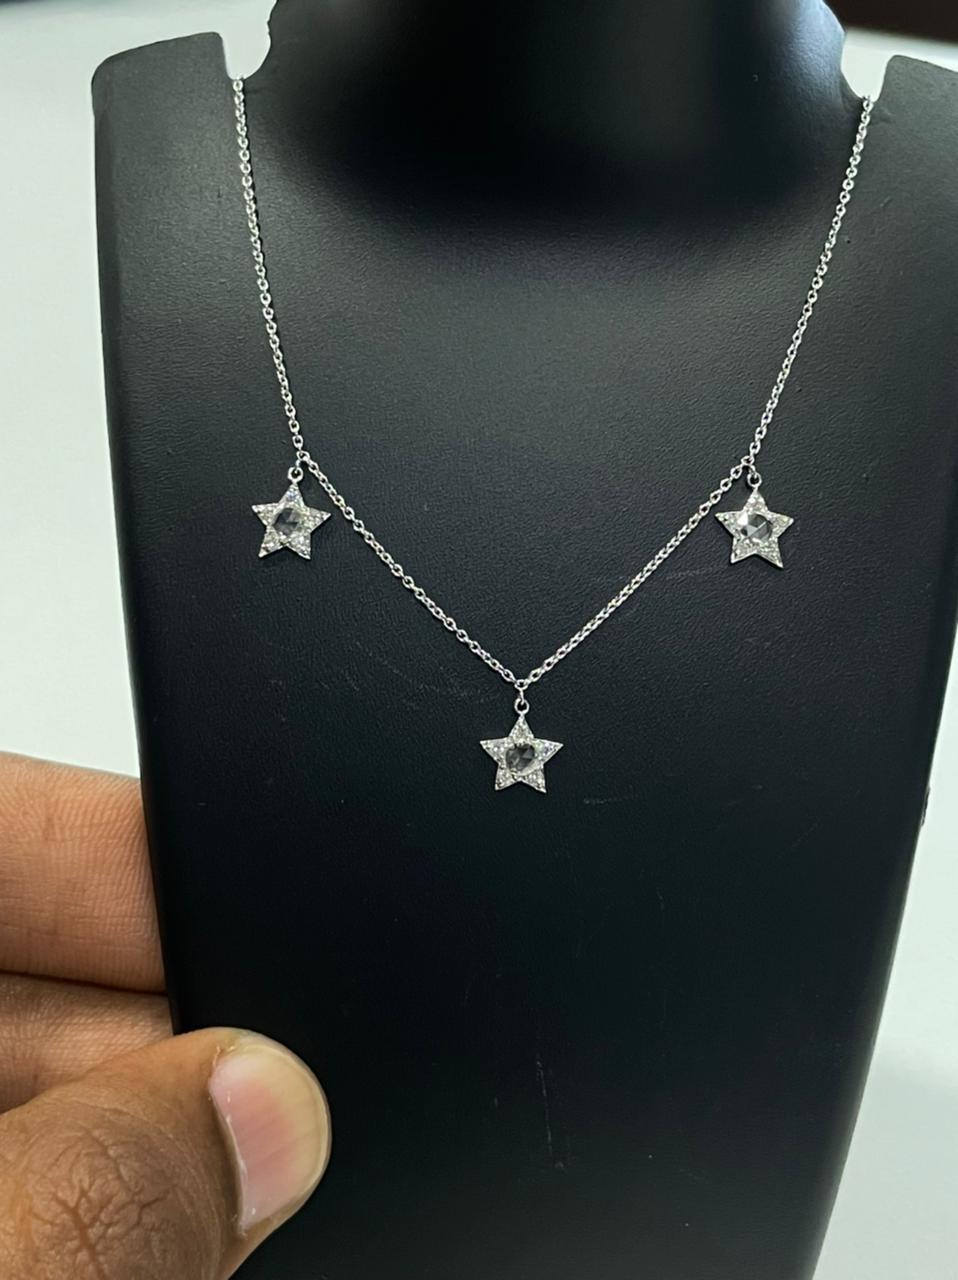 PANIM Rose cut Diamond Star Necklace in 18K White Gold

Timeless and dainty 18K solid gold pave diamond small star charm hanging form a link necklace. A perfect necklace by itself or layered, wear it day or night, up or down. This necklace is